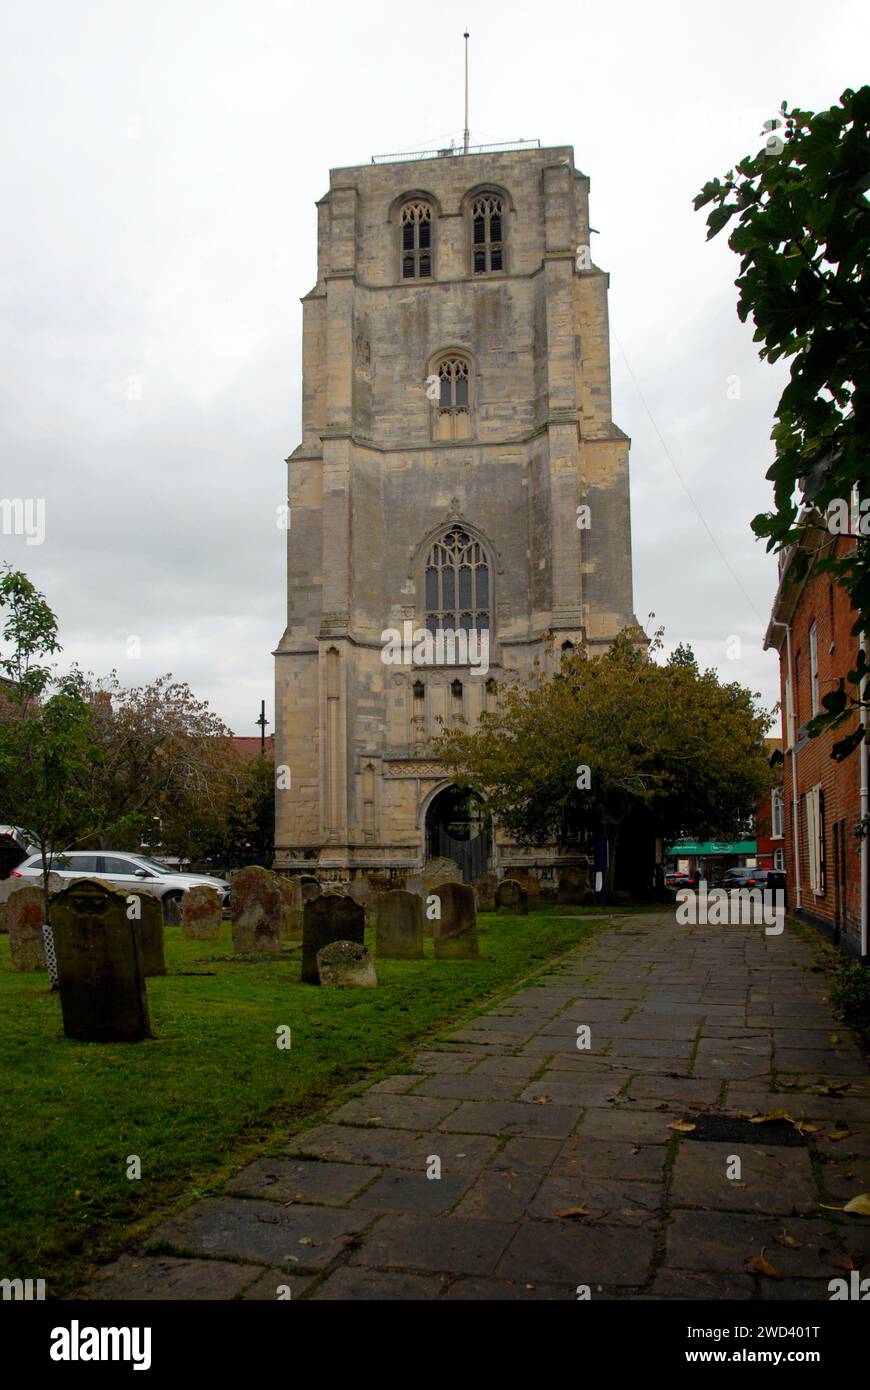 Beccles Bell Tower, Beccles, Suffolk, England Stockfoto